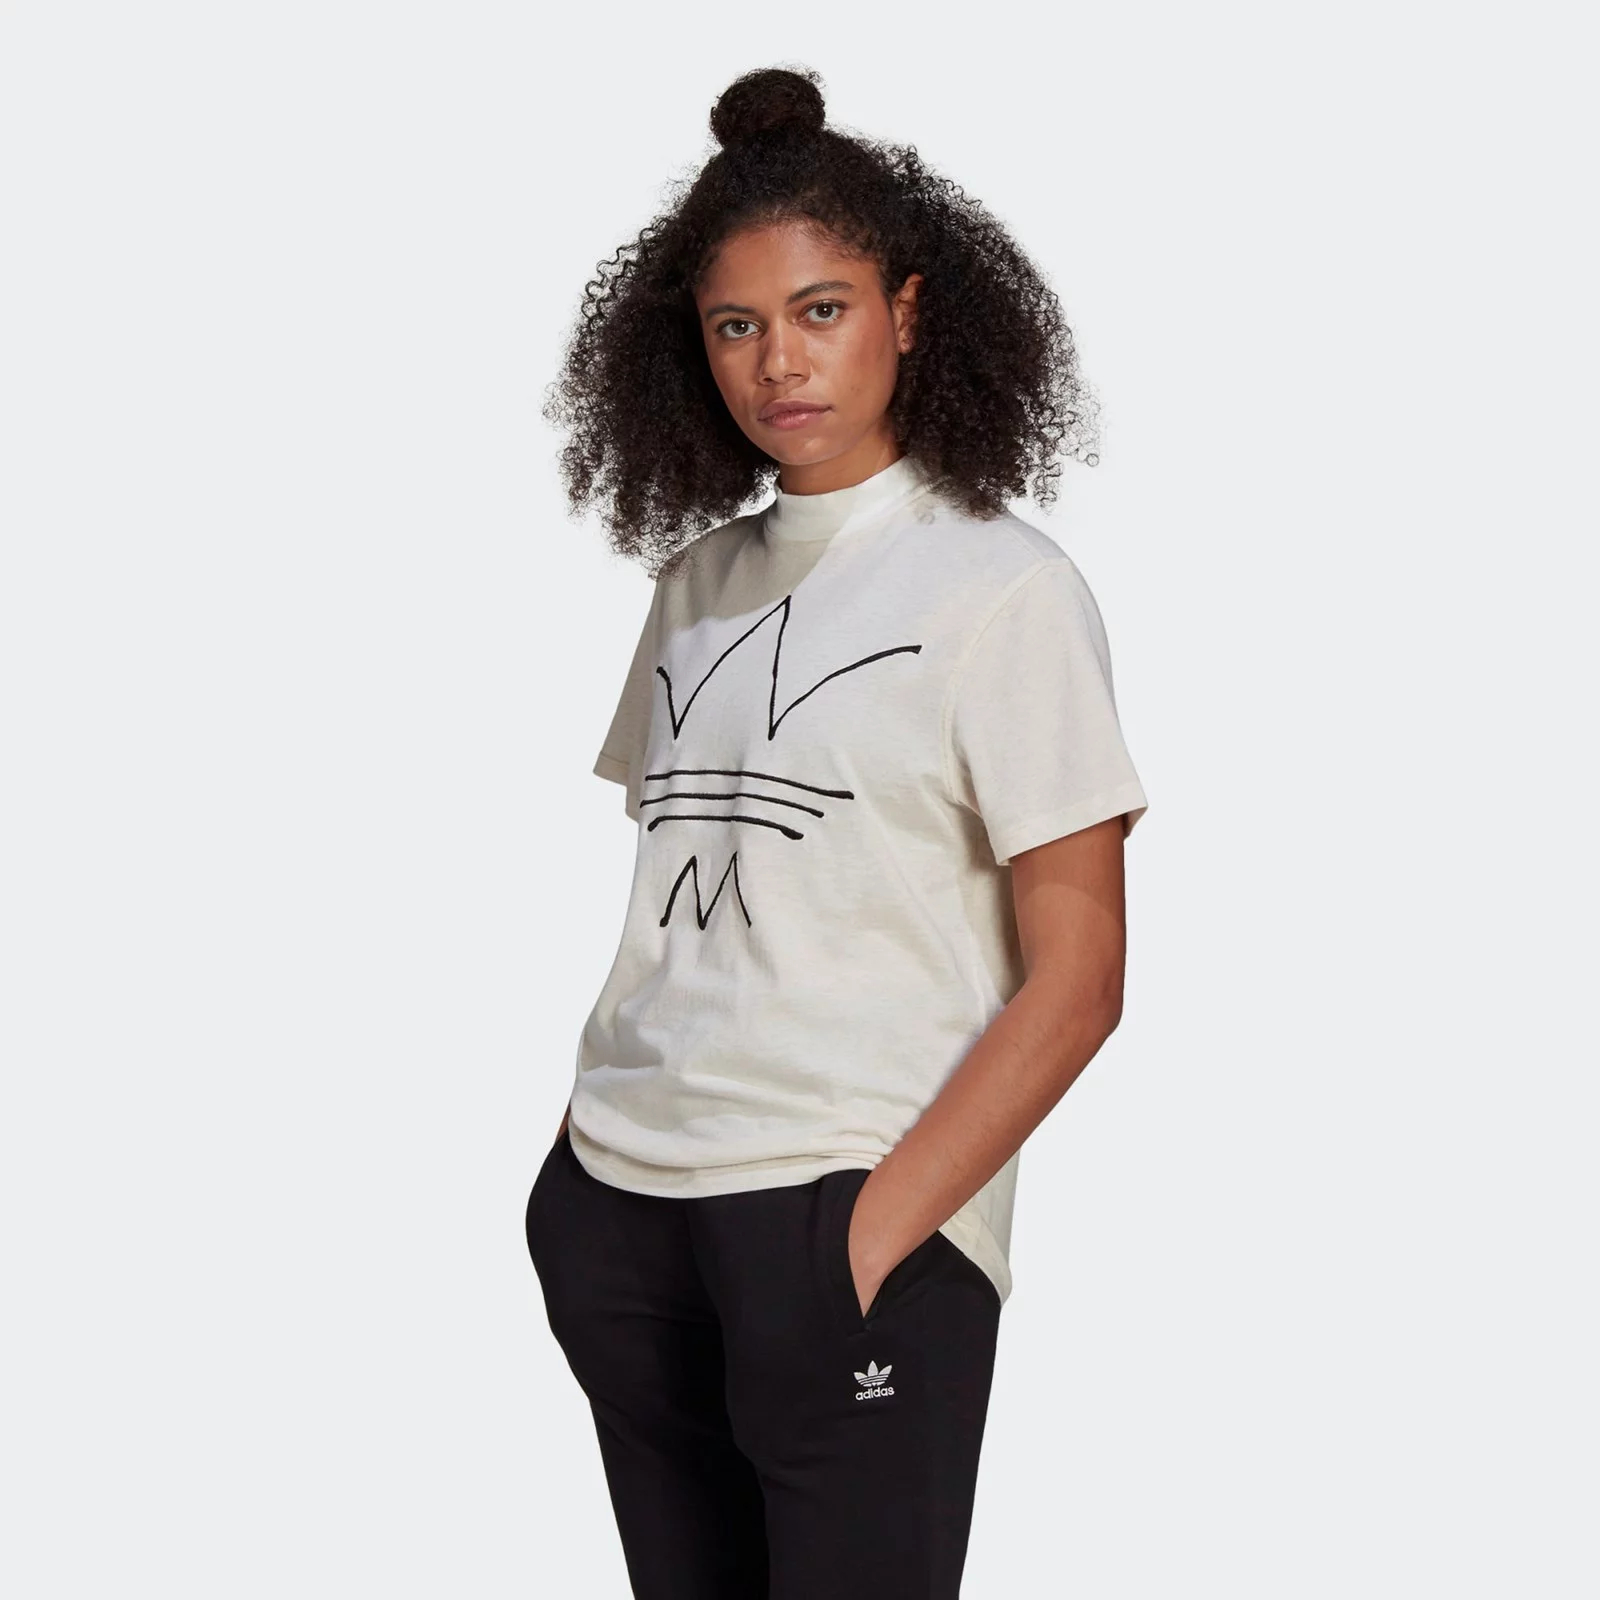 Camiseta de mujer adidas R.Y.V. Tee Off White GN4352 (34(S)) (White)